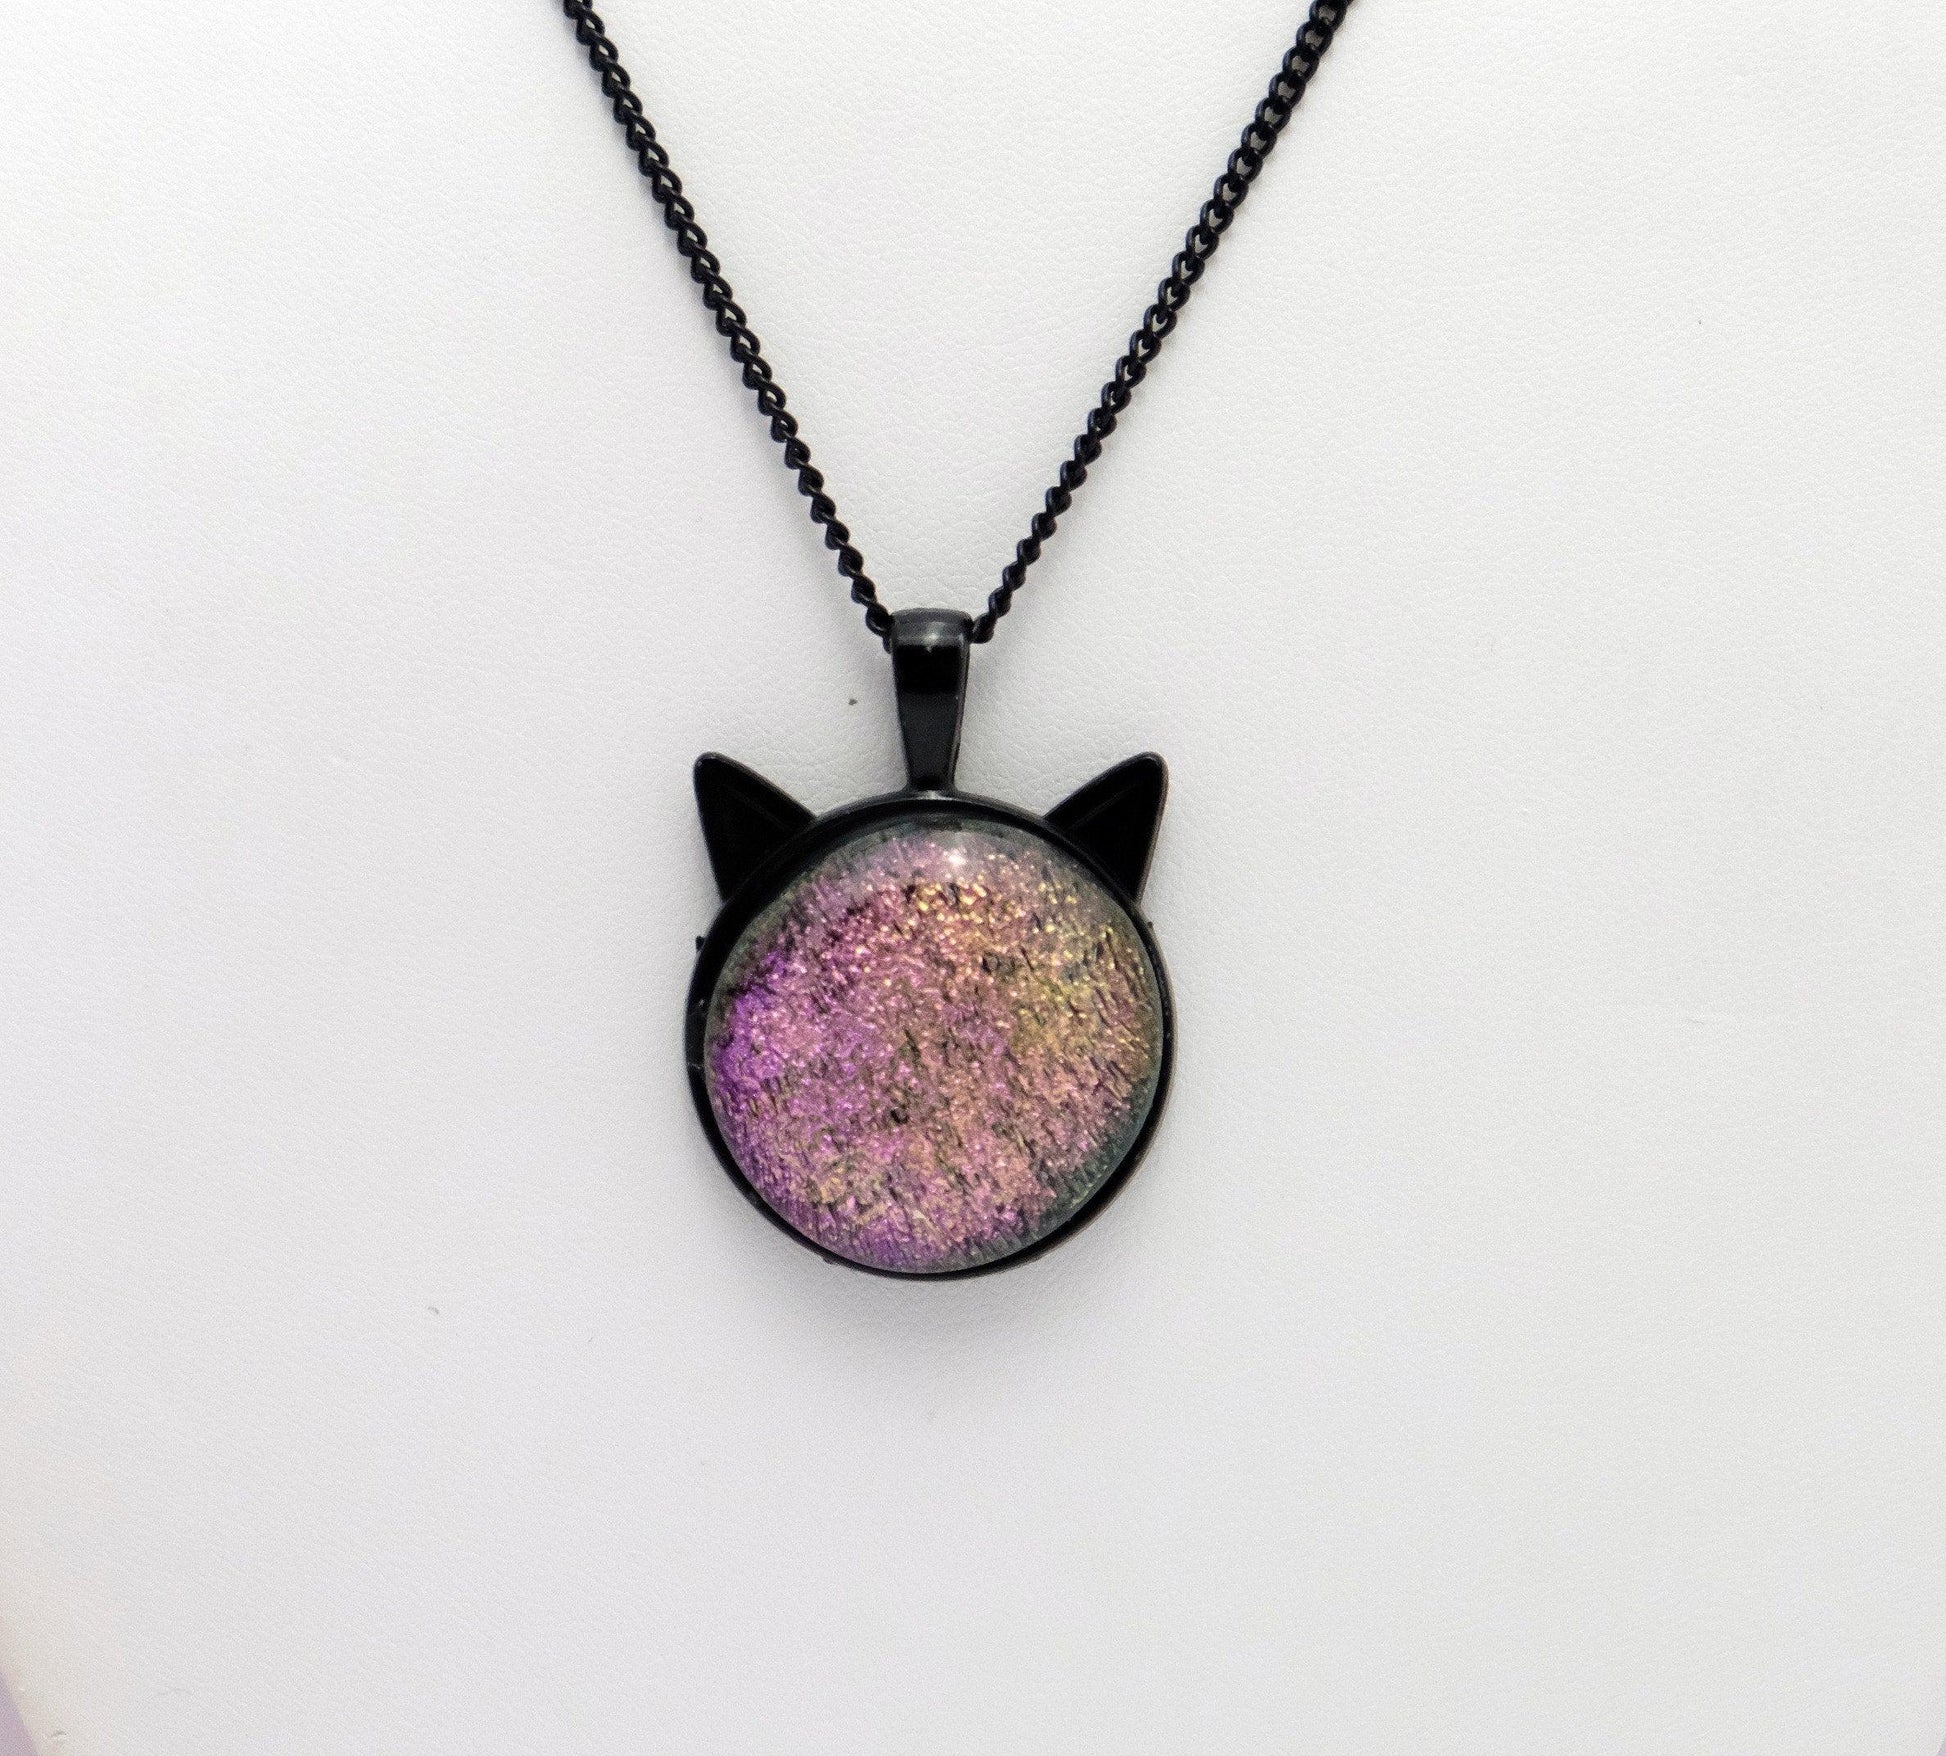 Black Cat pendant necklace, with color shifting pink/purple/green dichroic fused glass center stone on a 20 inch black chain seeds glassworks seedsglassworks